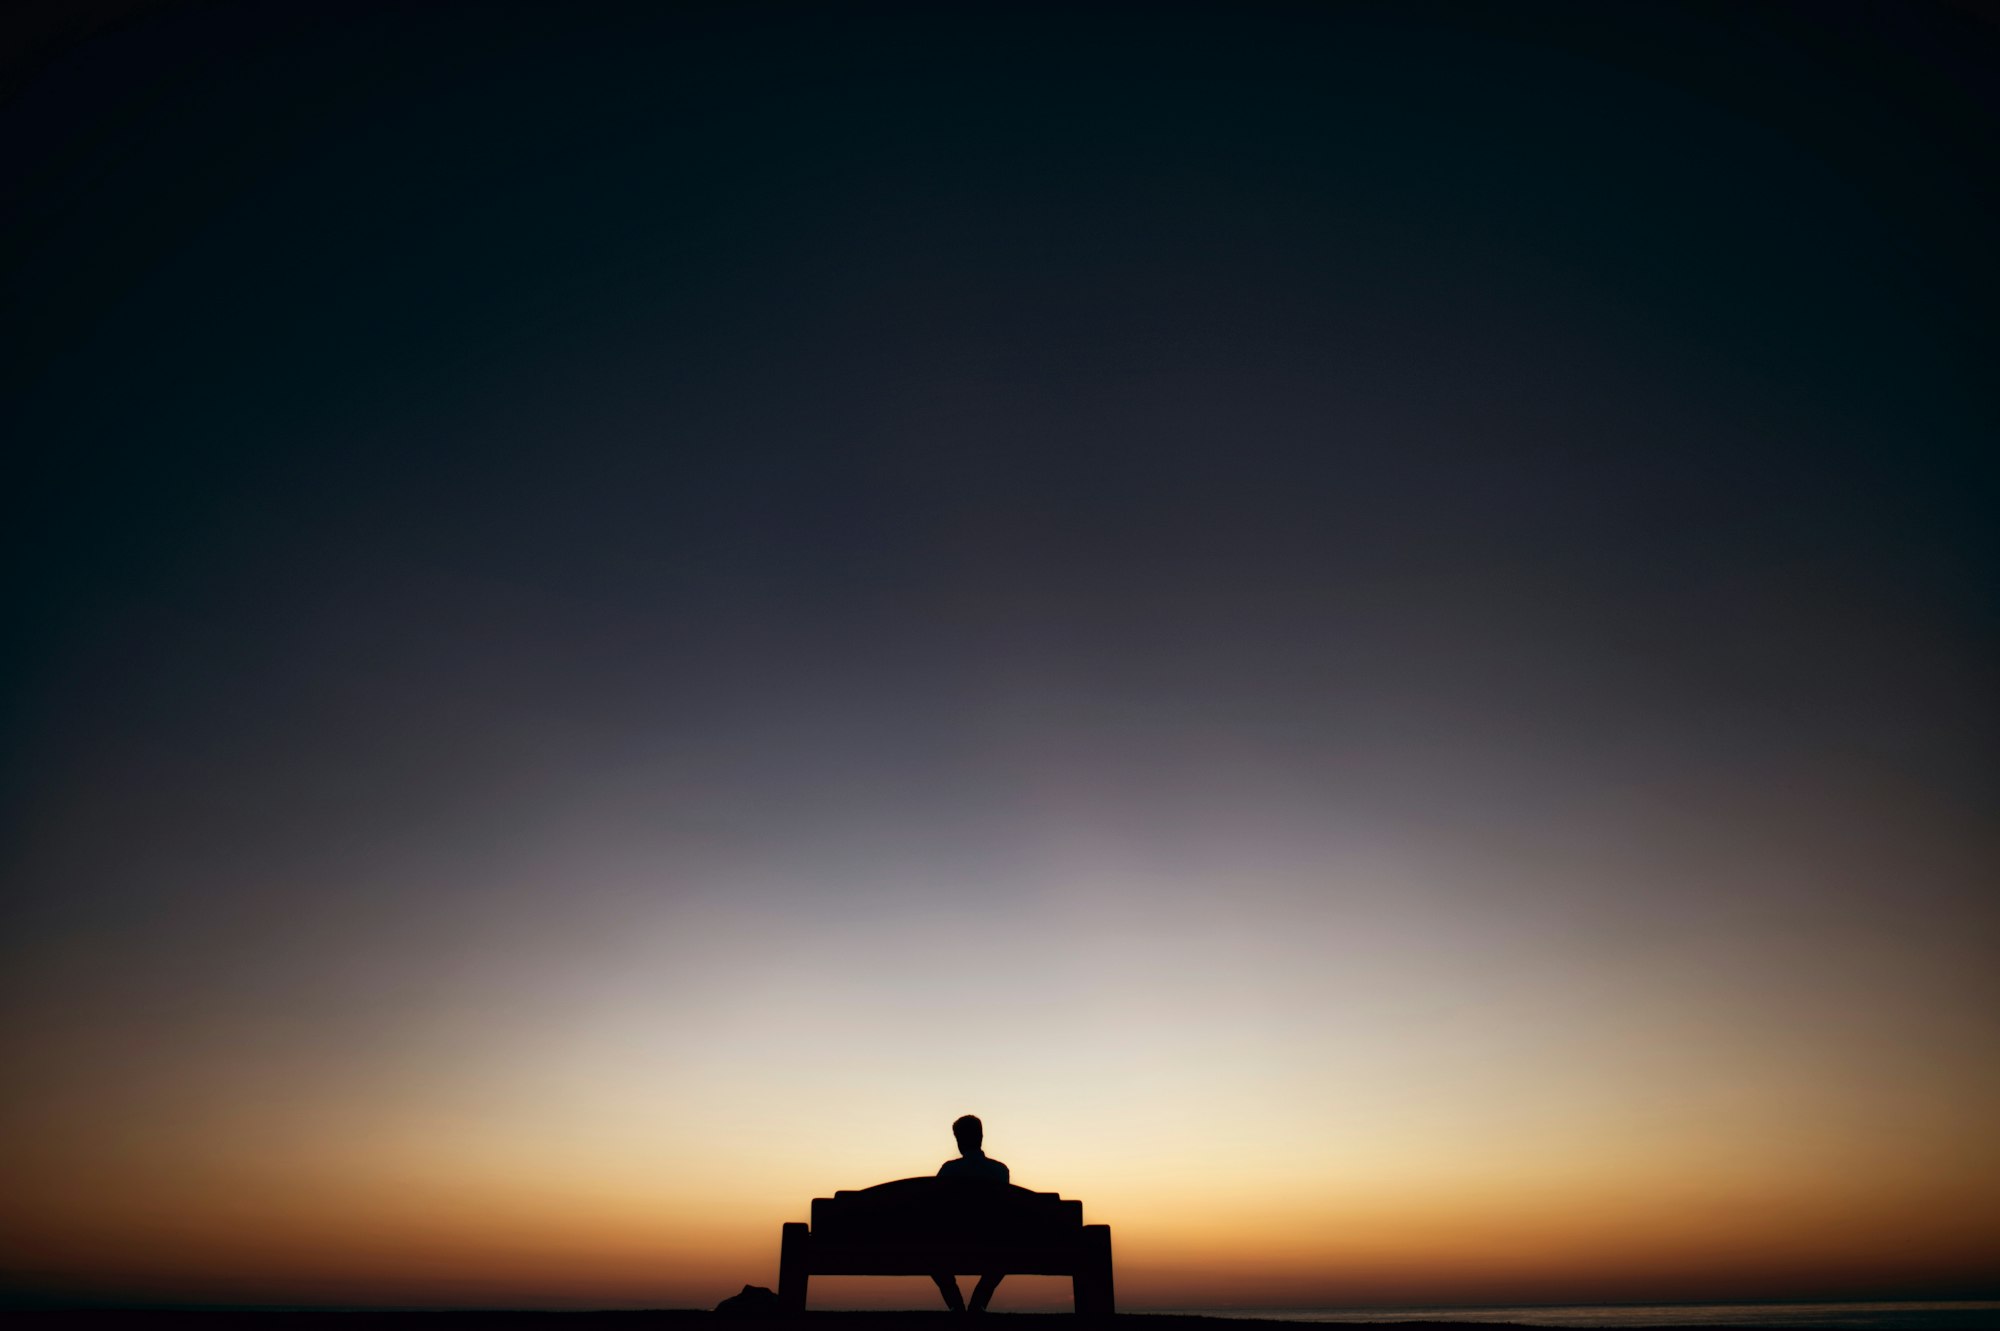 Man sitting on a bench during sunset.